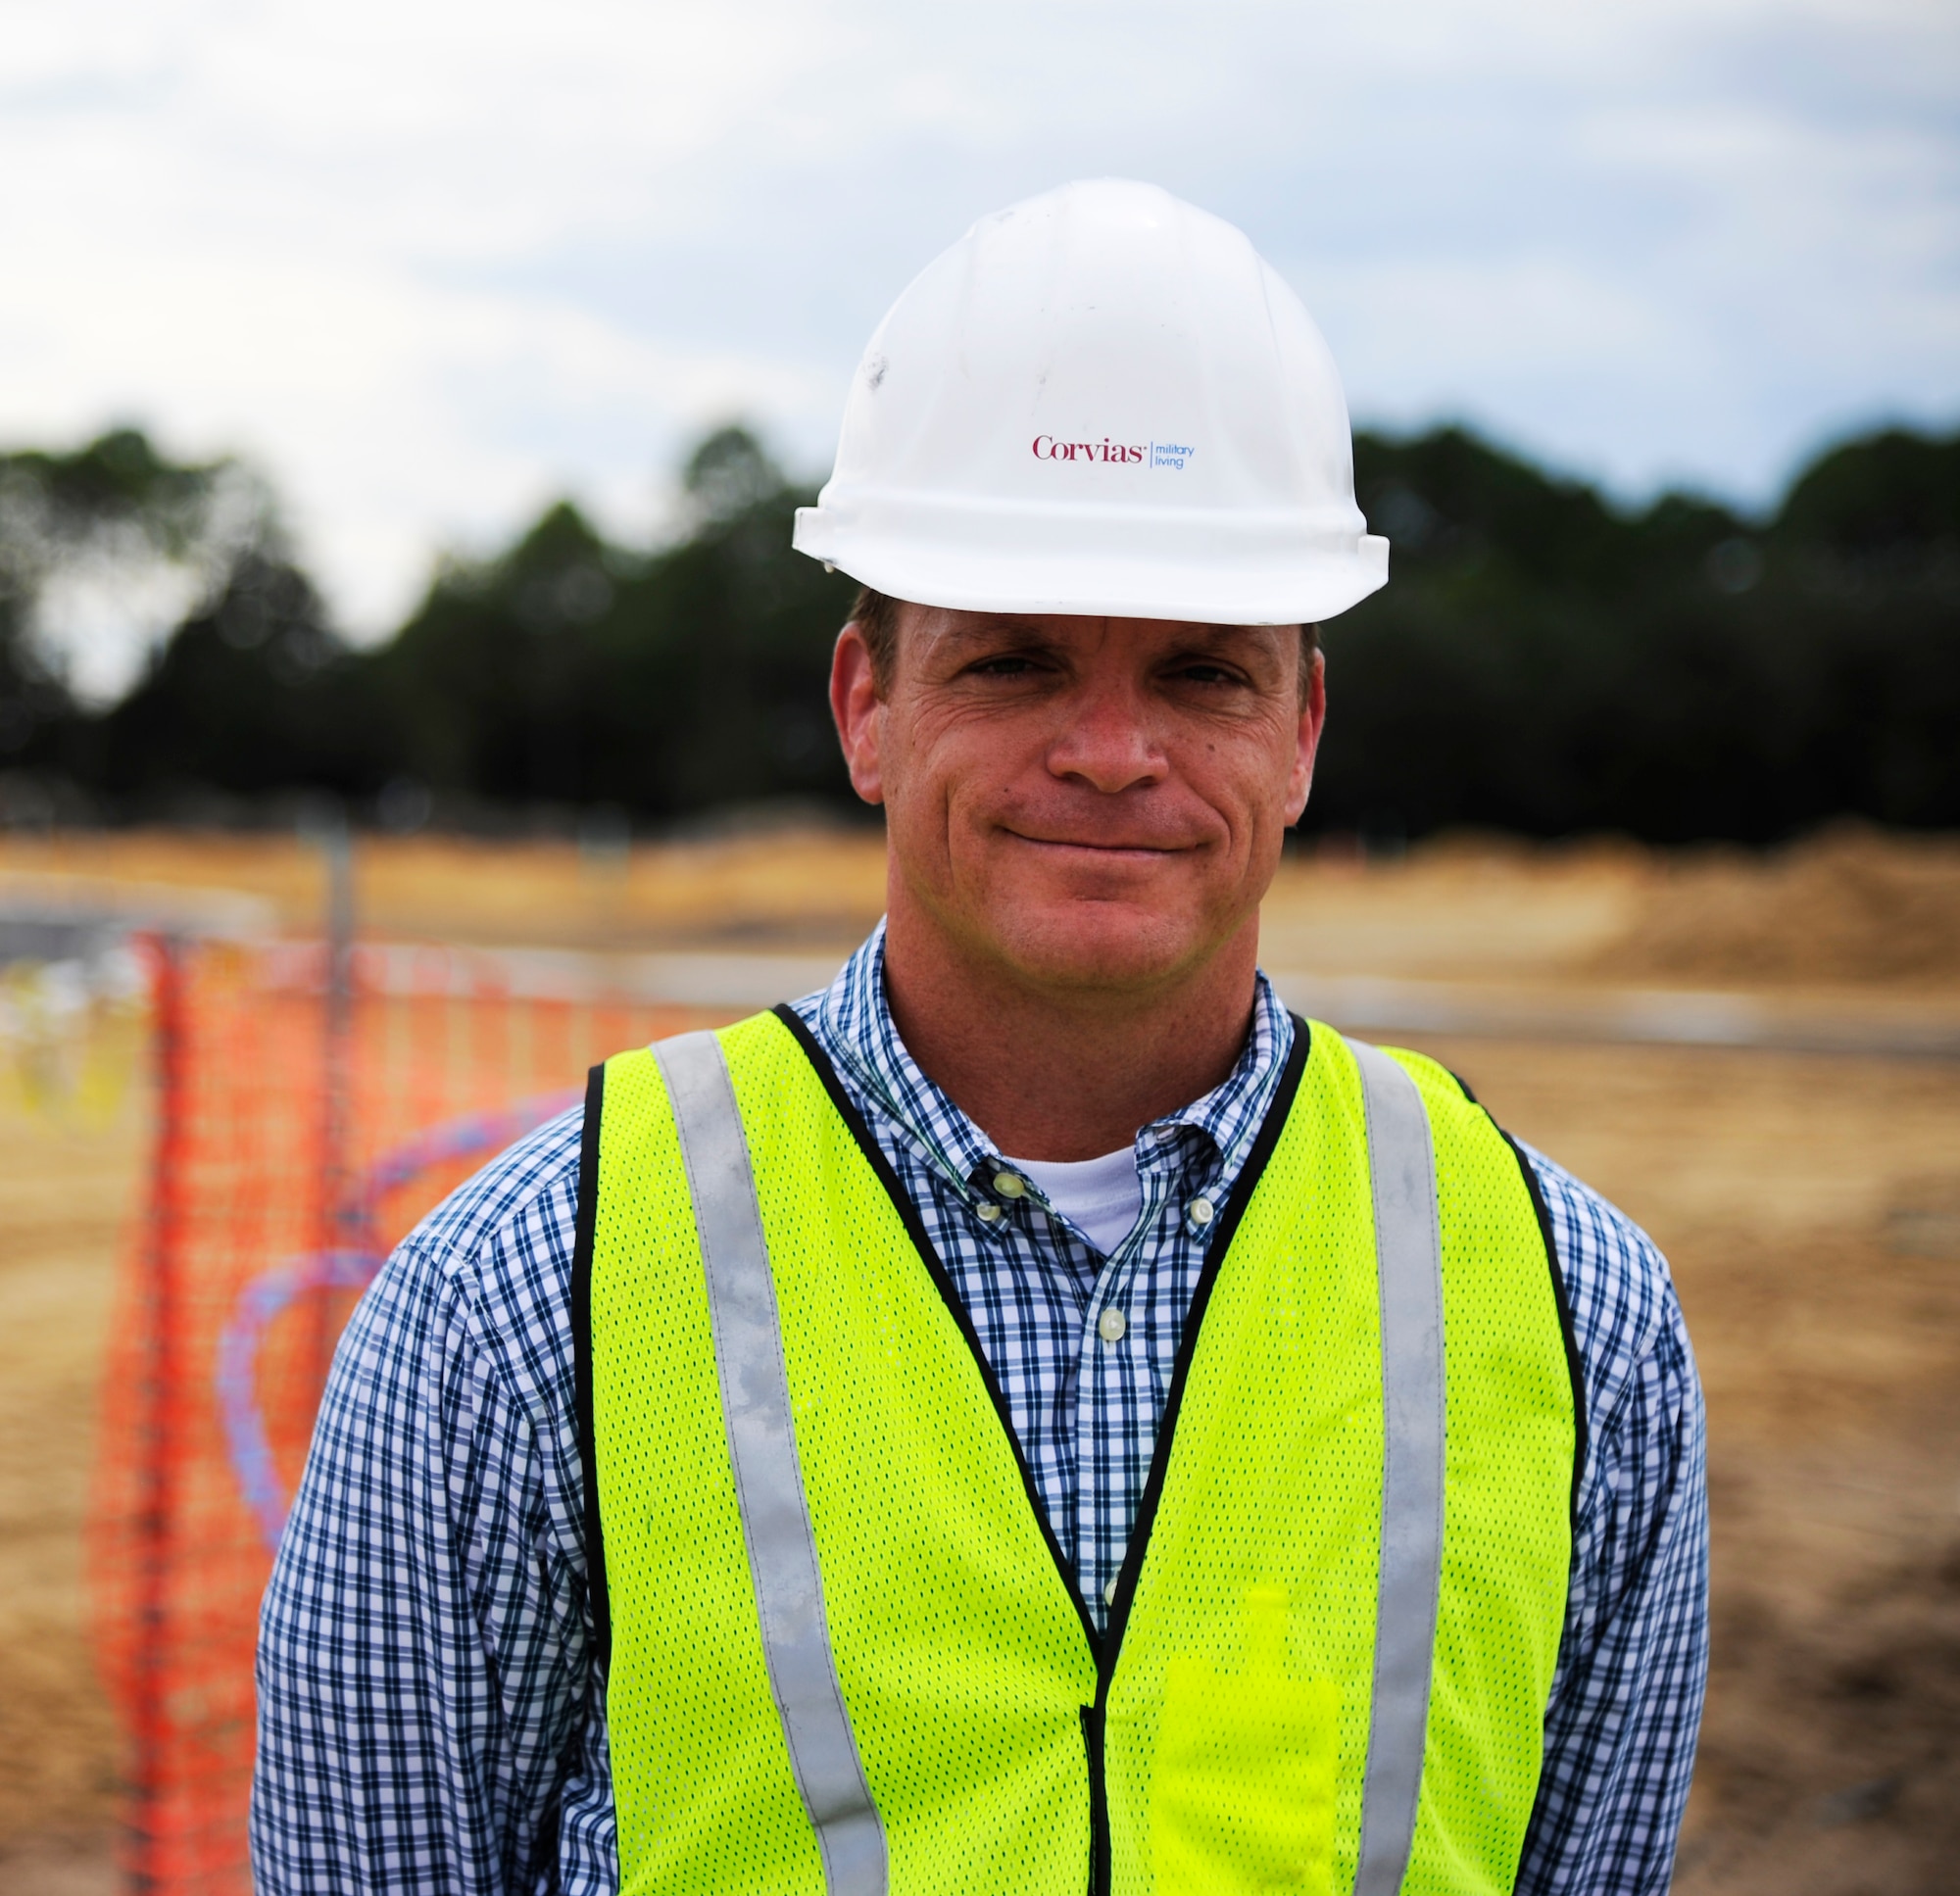 Bob McDonald, director of construction for Corvias Military Living, stands at the construction site of the future Osprey neighborhood on Hurlburt Field, Fla., Oct. 2, 2014. The neighborhood will consist of 63 new single family homes for senior non-commissioned officers and chief master sergeants. (U.S. Air Force photo/Staff Sgt. Sarah Hanson)